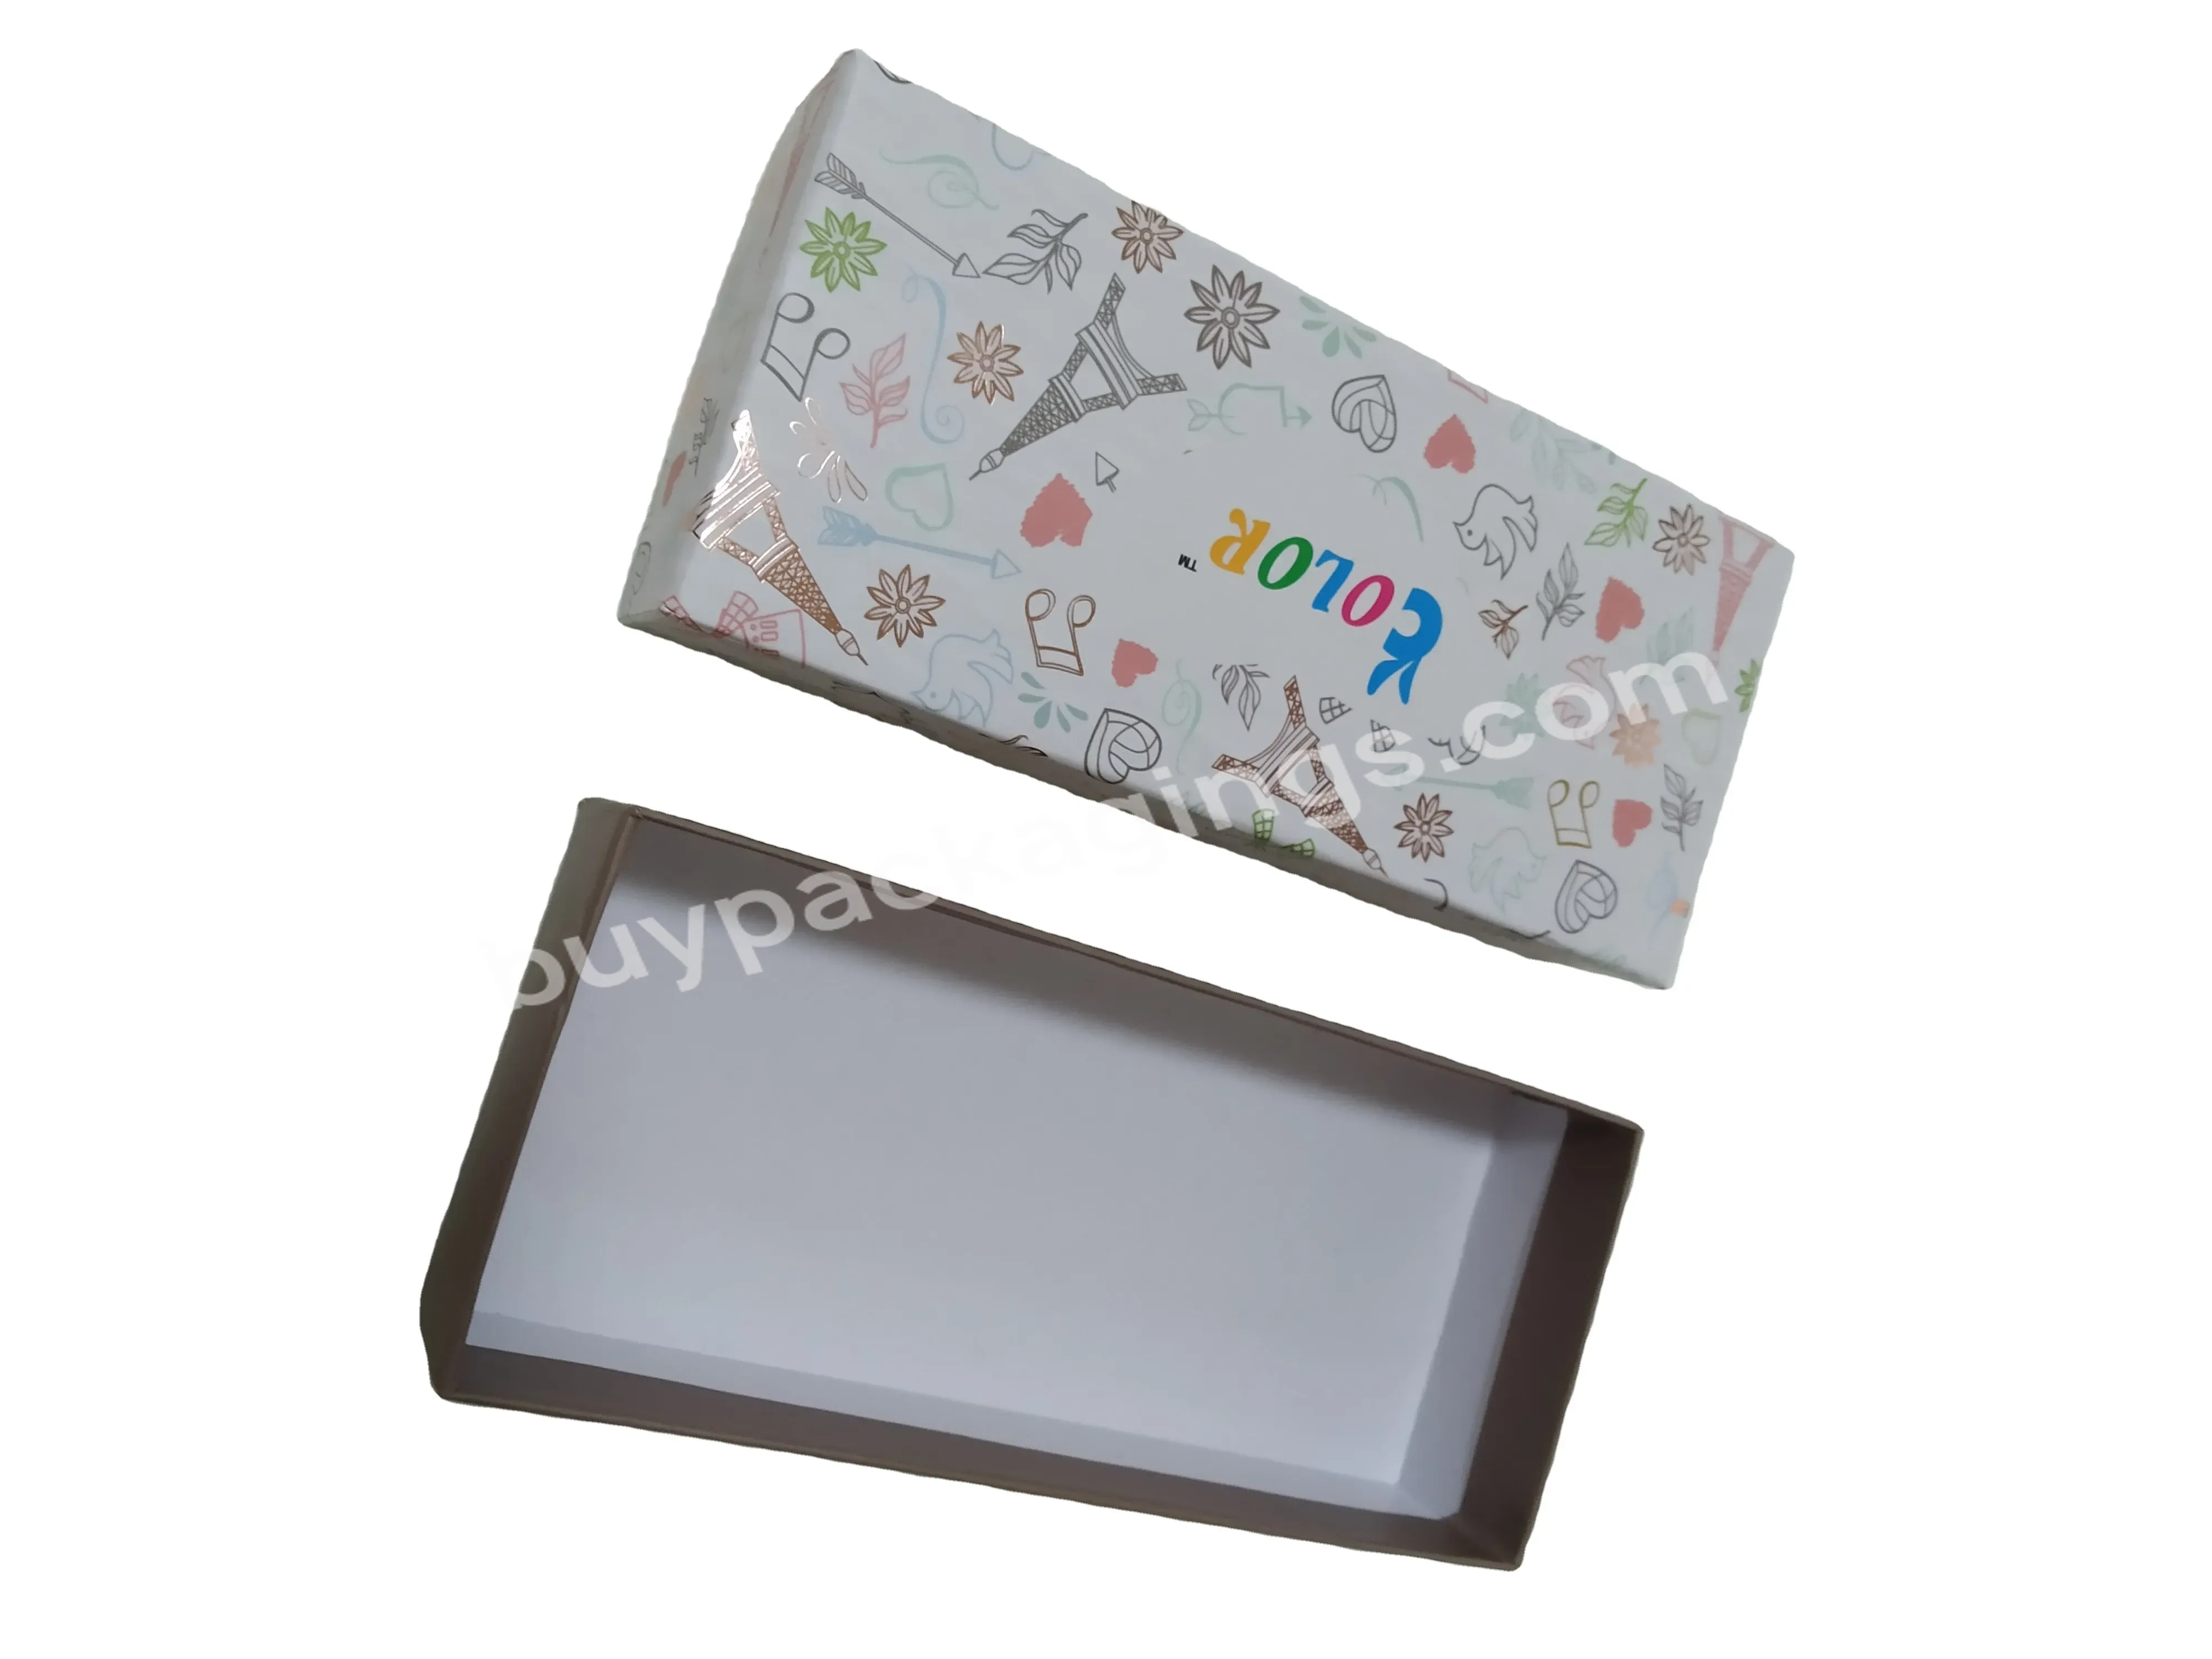 Print The Design On The Outside Lid And Base Paper Box With You Own Logo